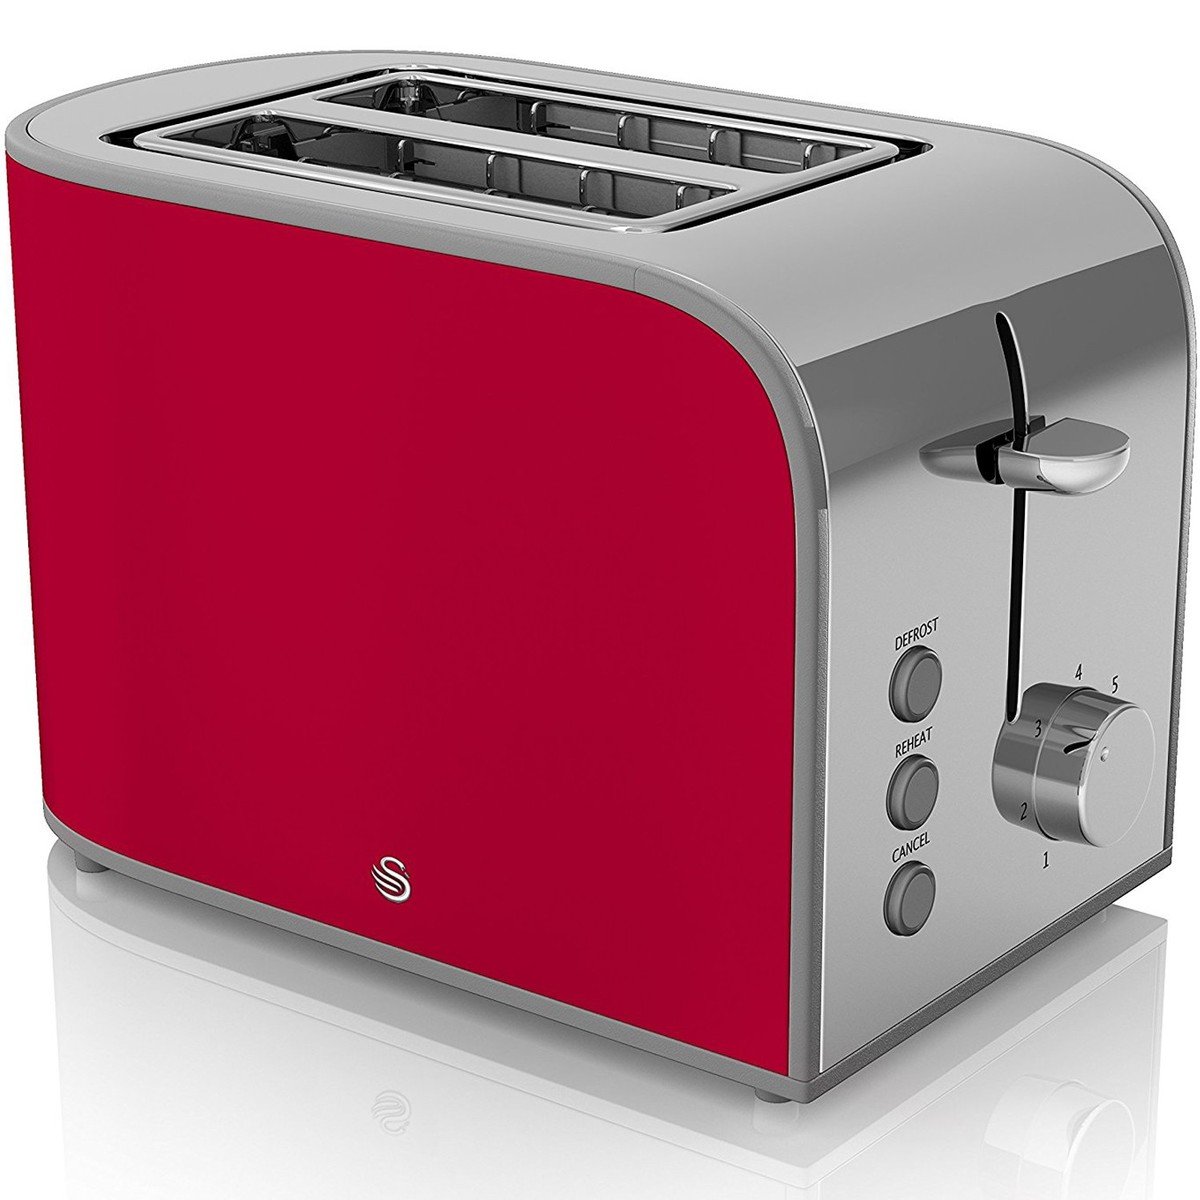 Swan 2 Slice Toaster ST17020 Assorted Colors 1 Piece